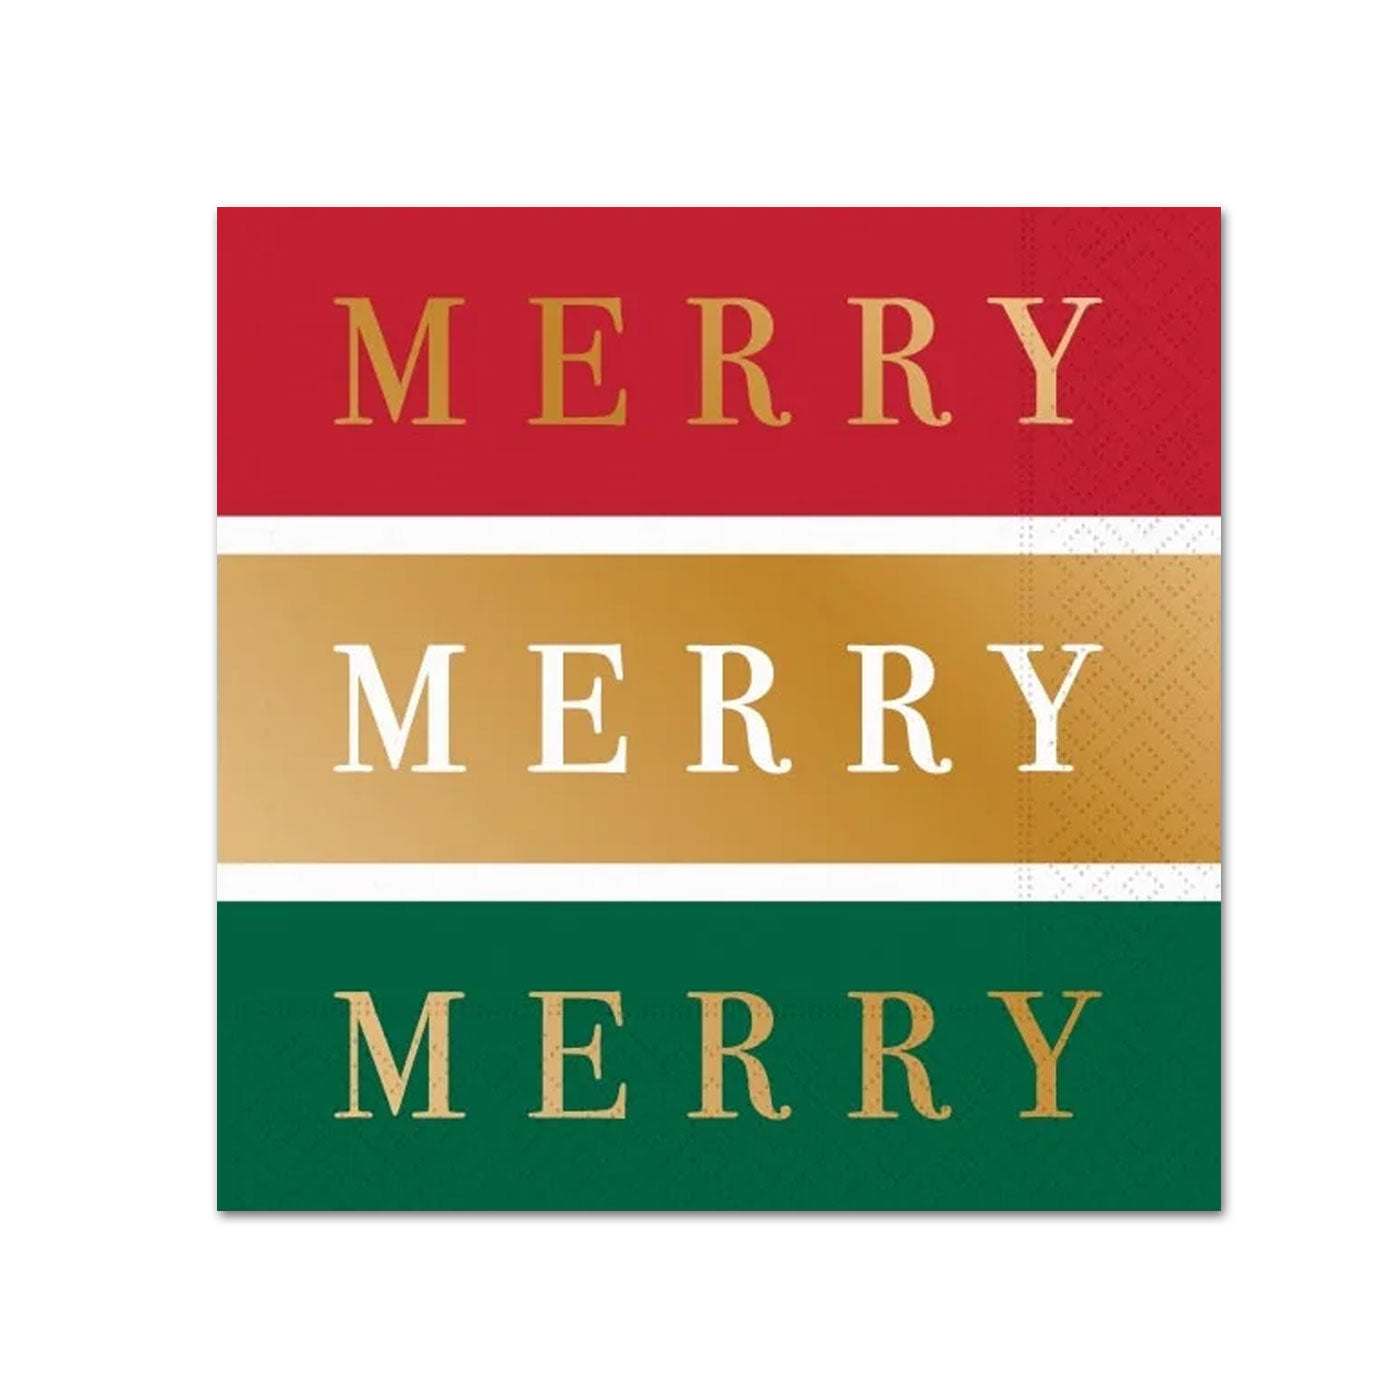 Merry Merry Merry Gold Foil Paper Beverage Napkins